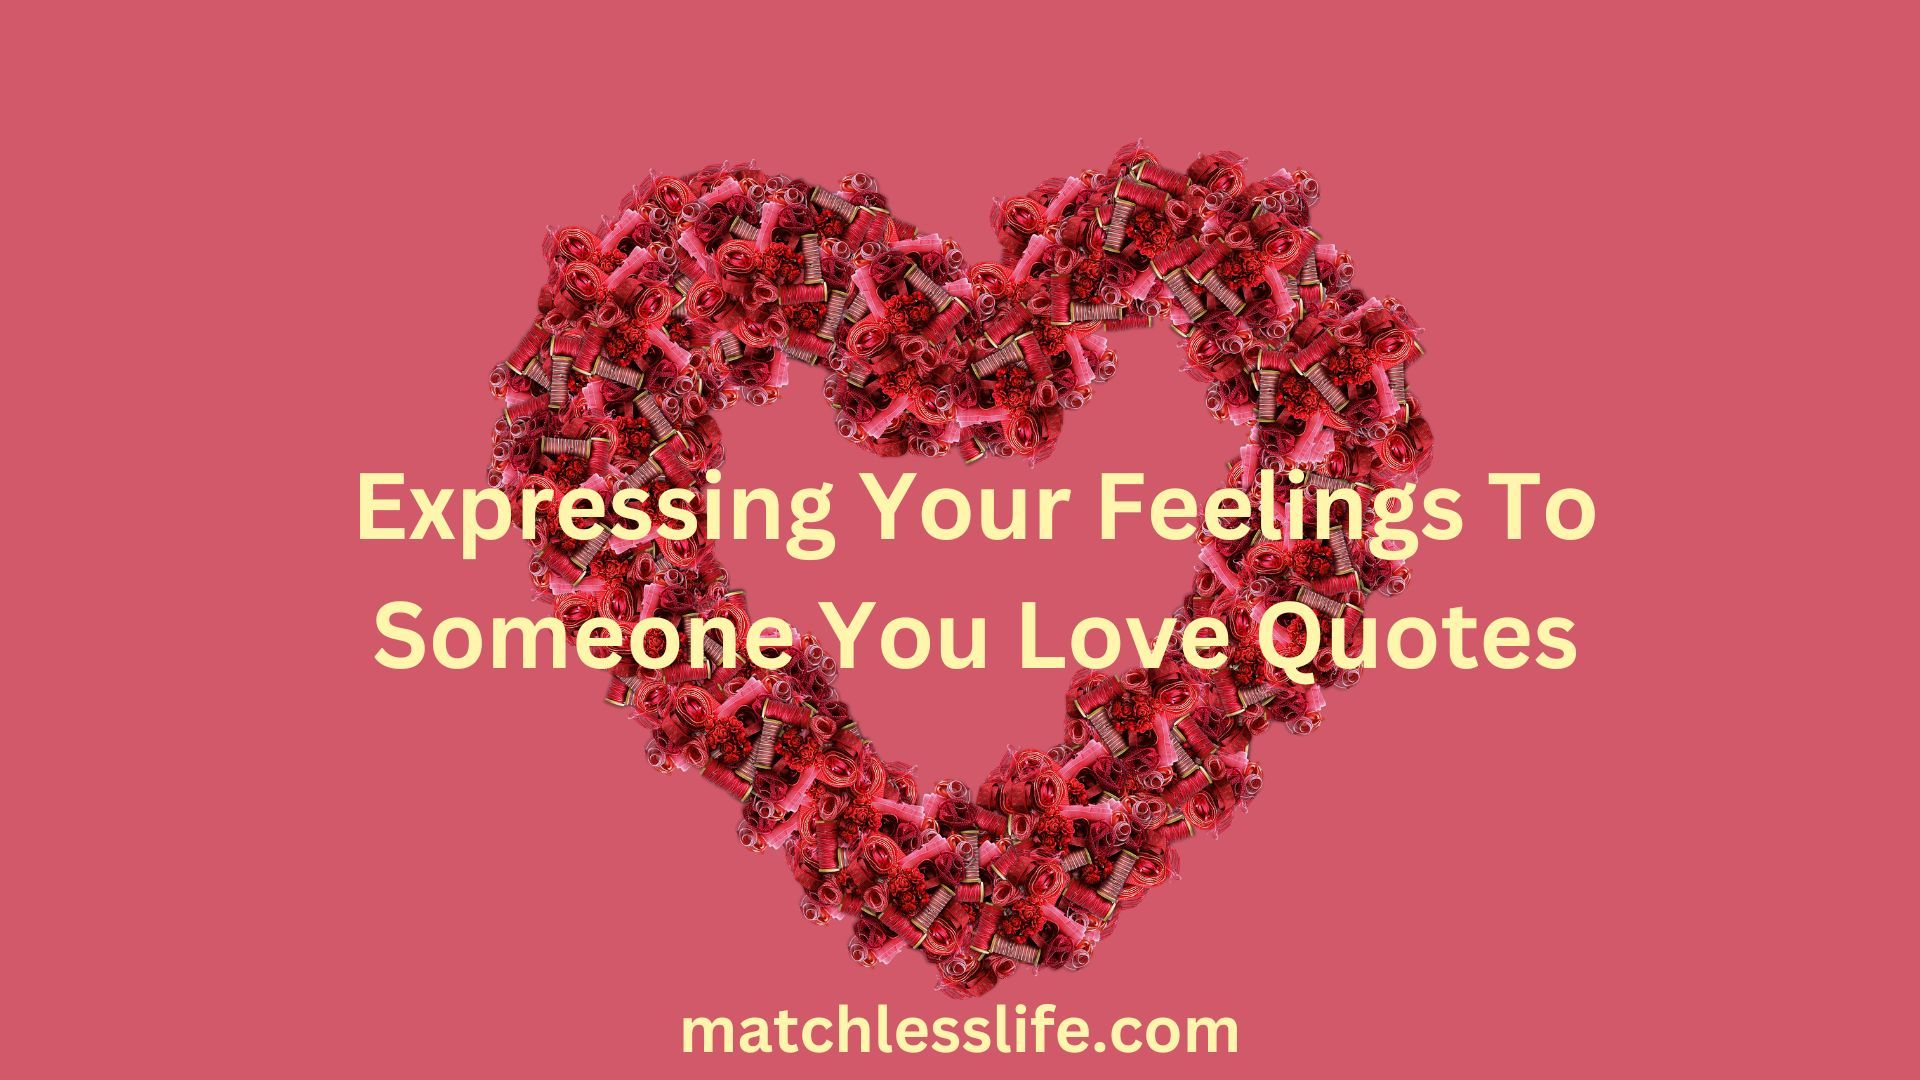 Expressing Your Feelings To Someone You Love Quotes